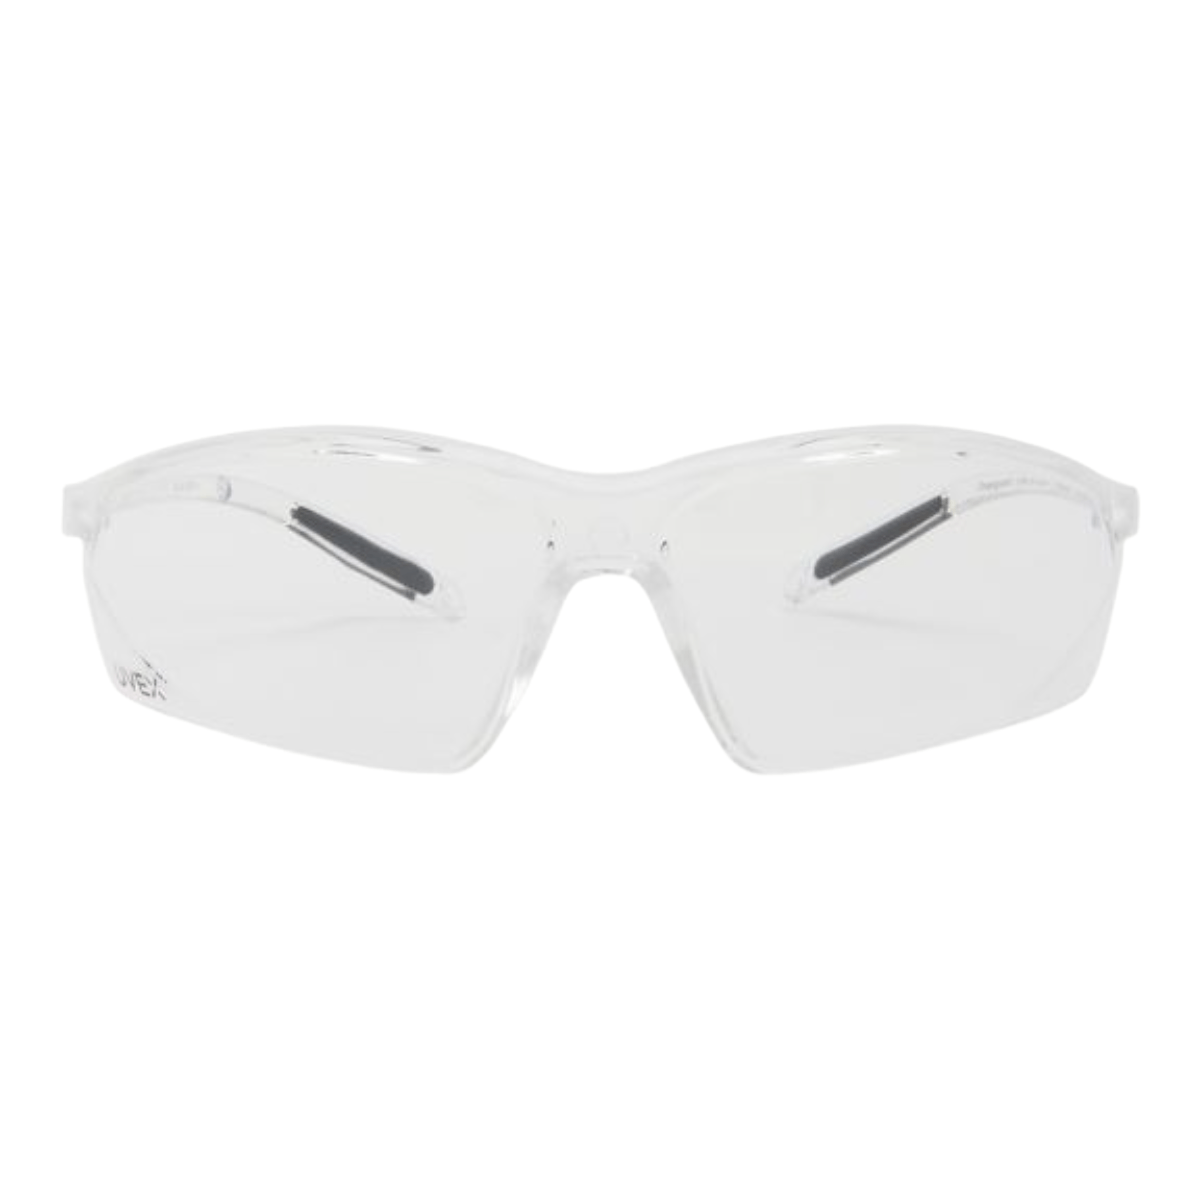 Honeywell Uvex A700 Slim Protective Safety Glasses